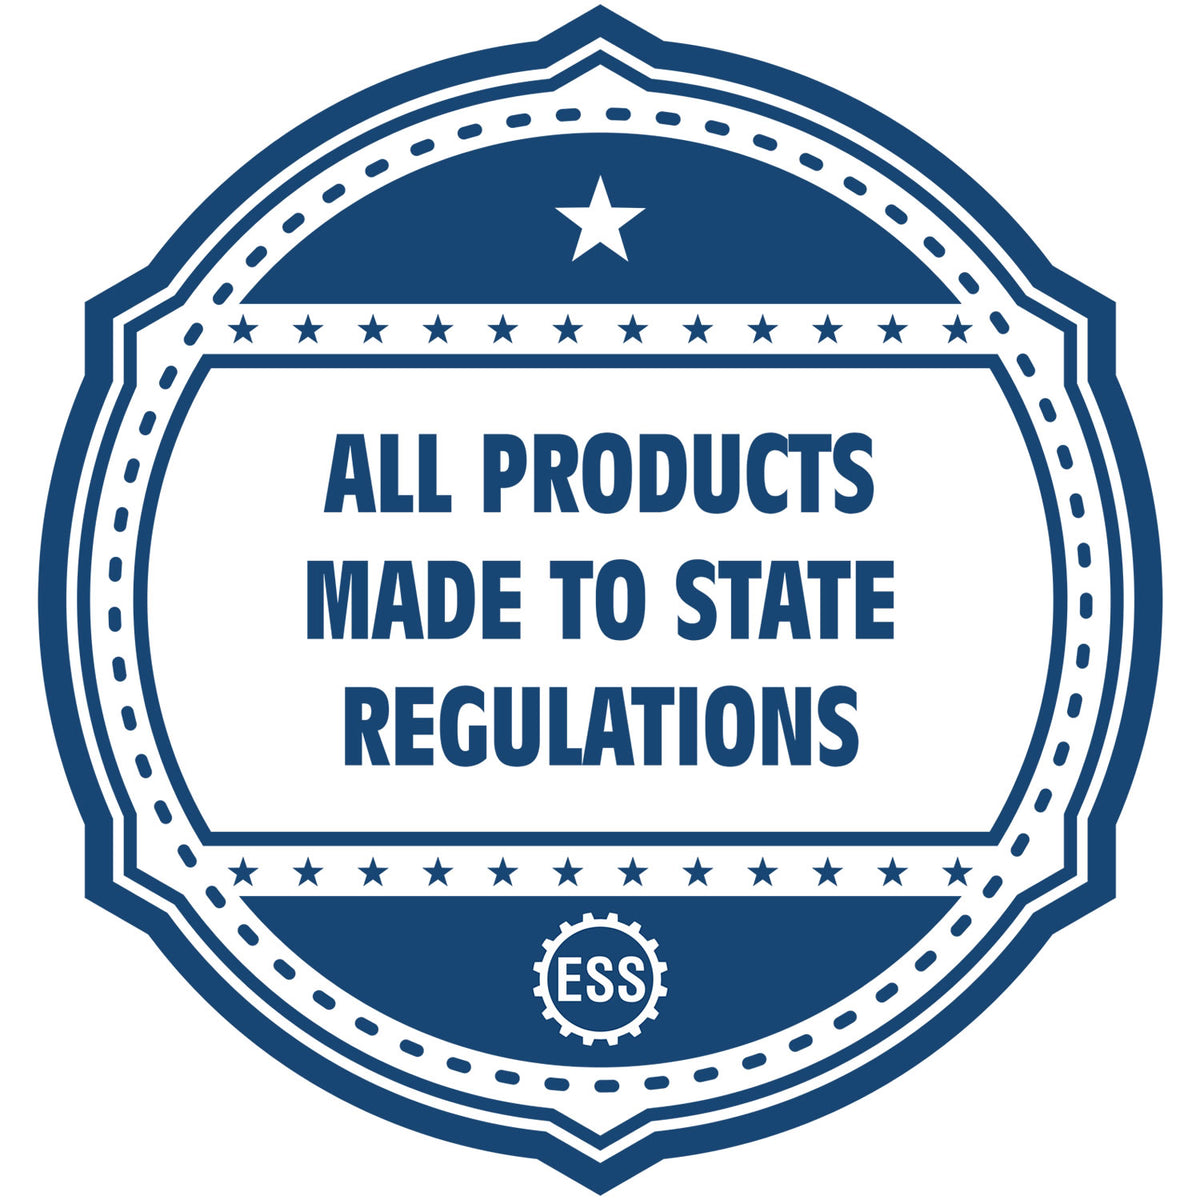 An icon or badge element for the Oklahoma Landscape Architectural Seal Stamp showing that this product is made in compliance with state regulations.